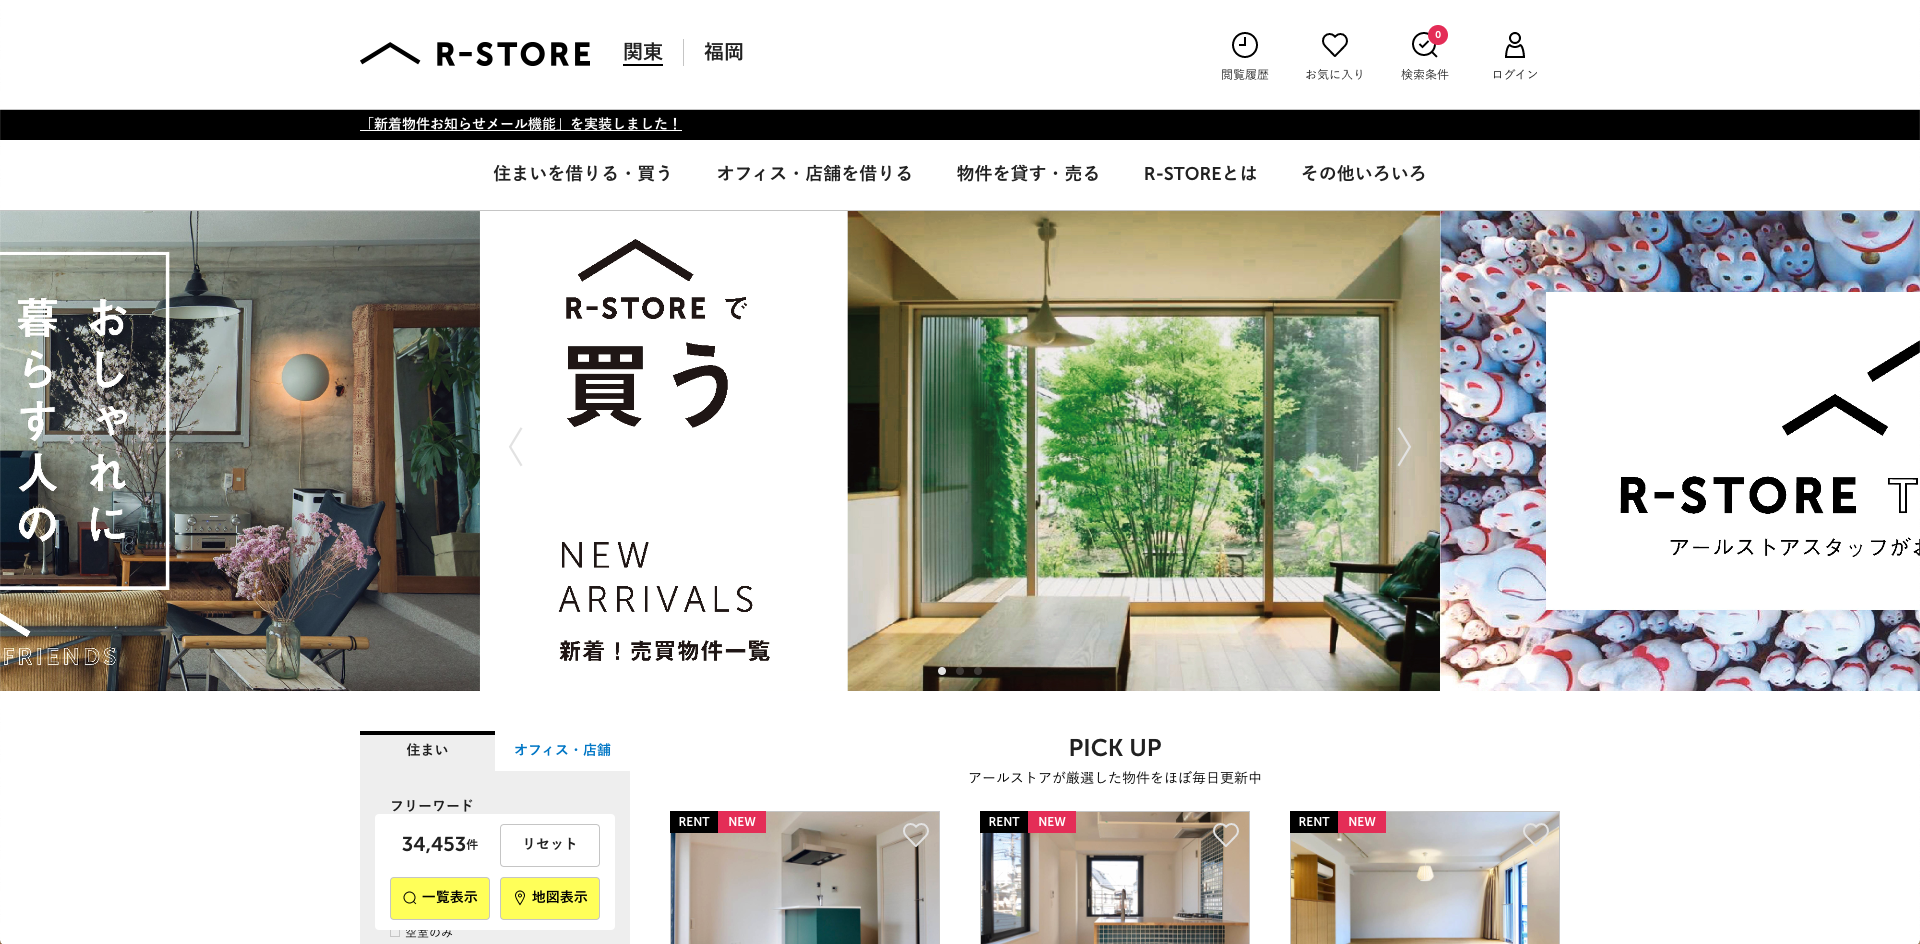 R-STORE top